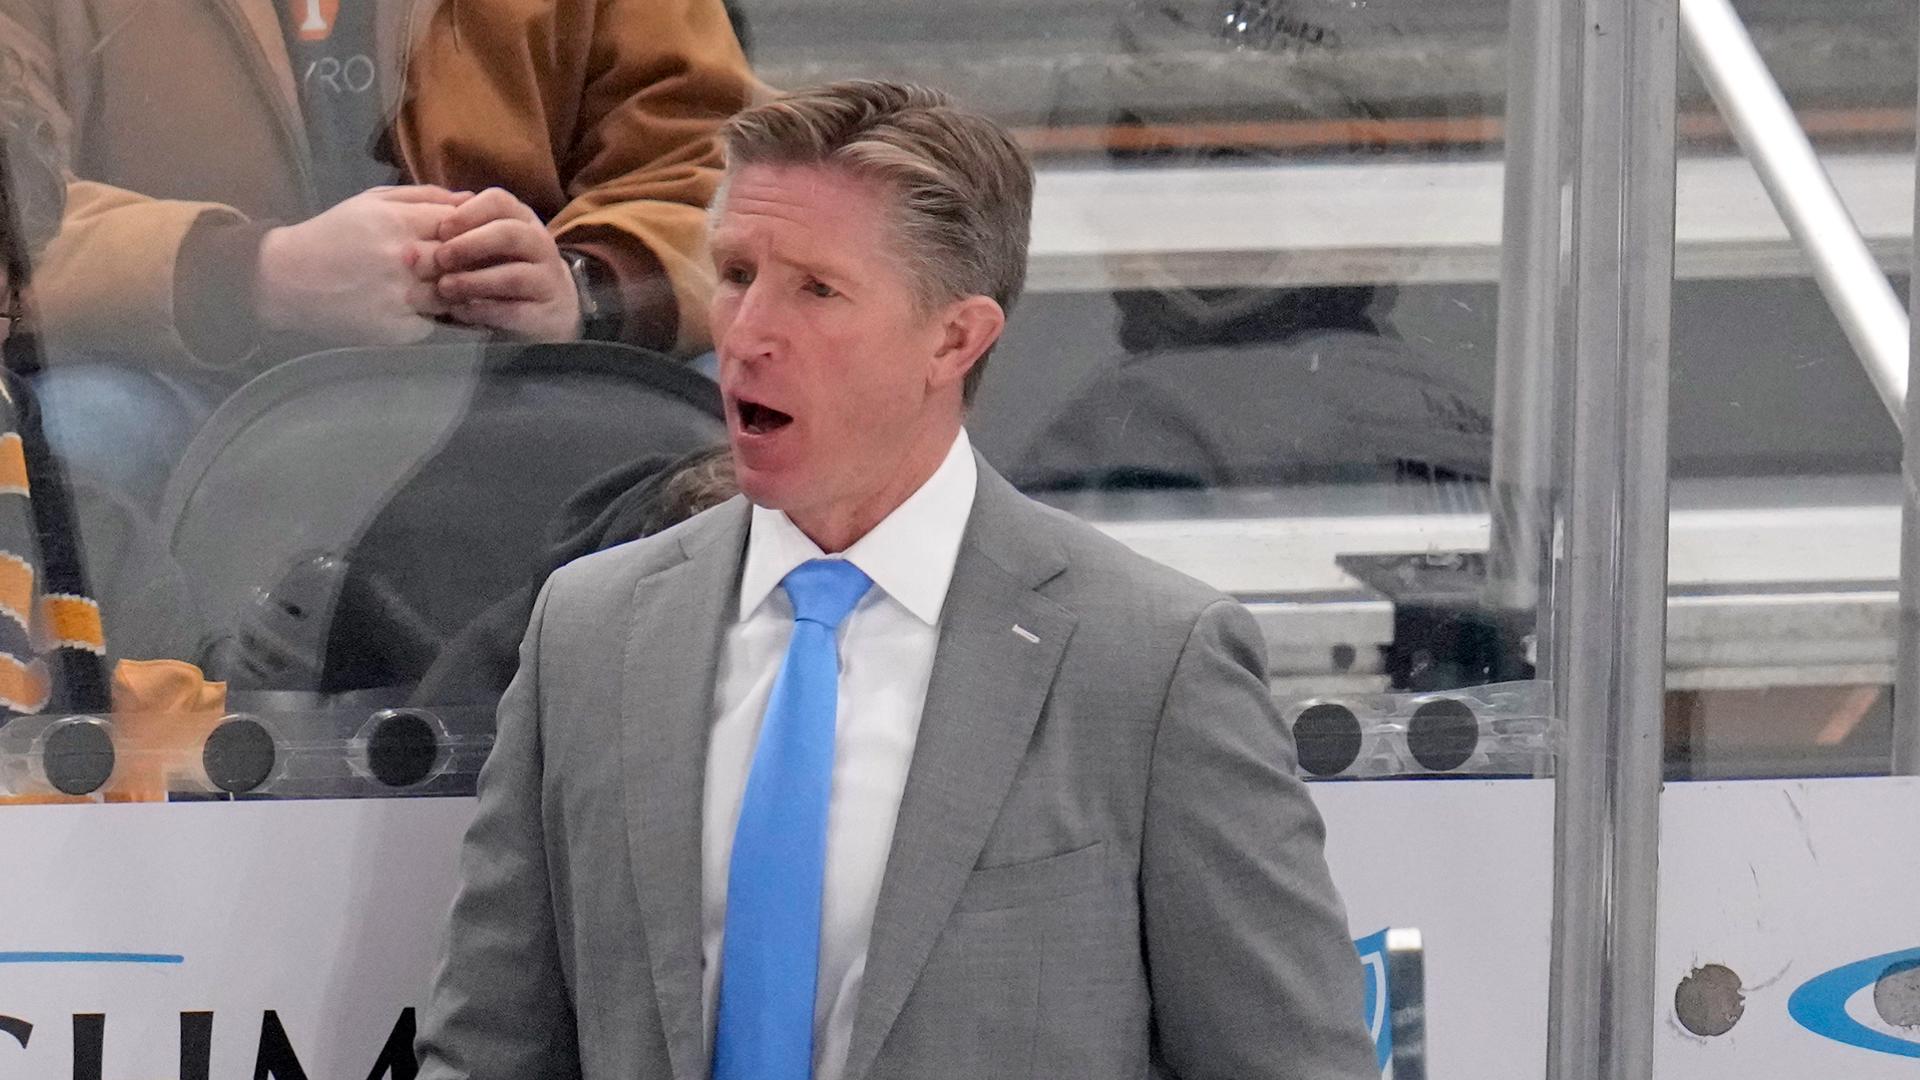 The Seattle Kraken have announced they are parting ways with head coach Dave Hakstol